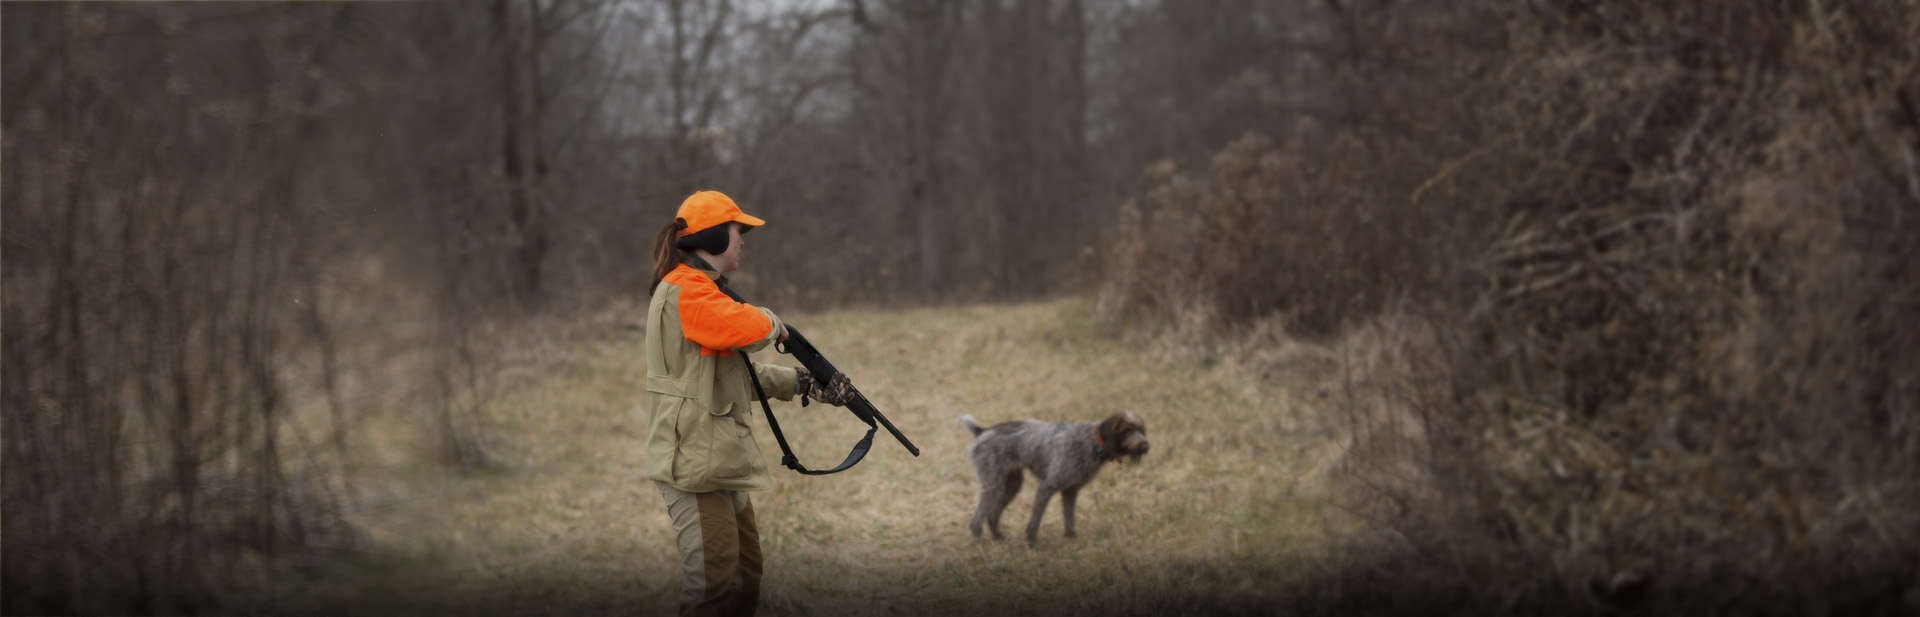 Hunter in a field hunting with a dog